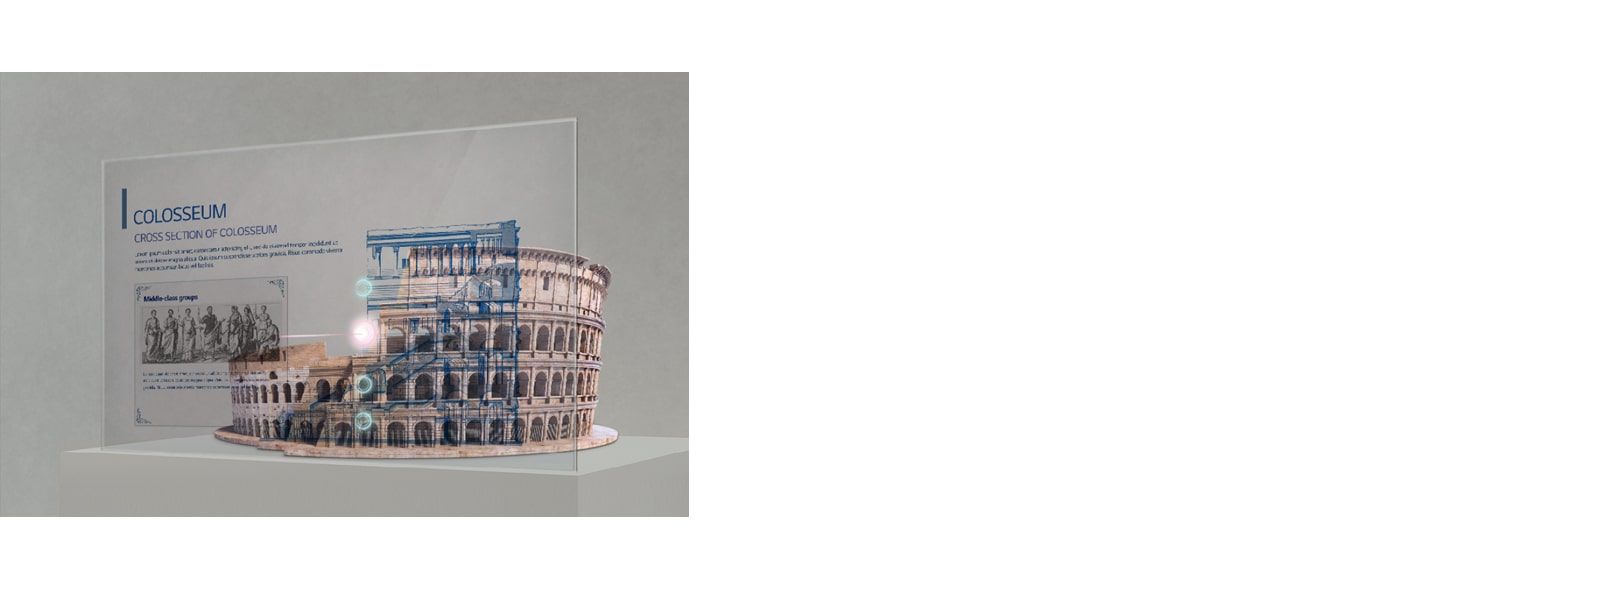 Information about the Colosseum is shown on the Transparent OLED screen set up in front of the Colosseum model.